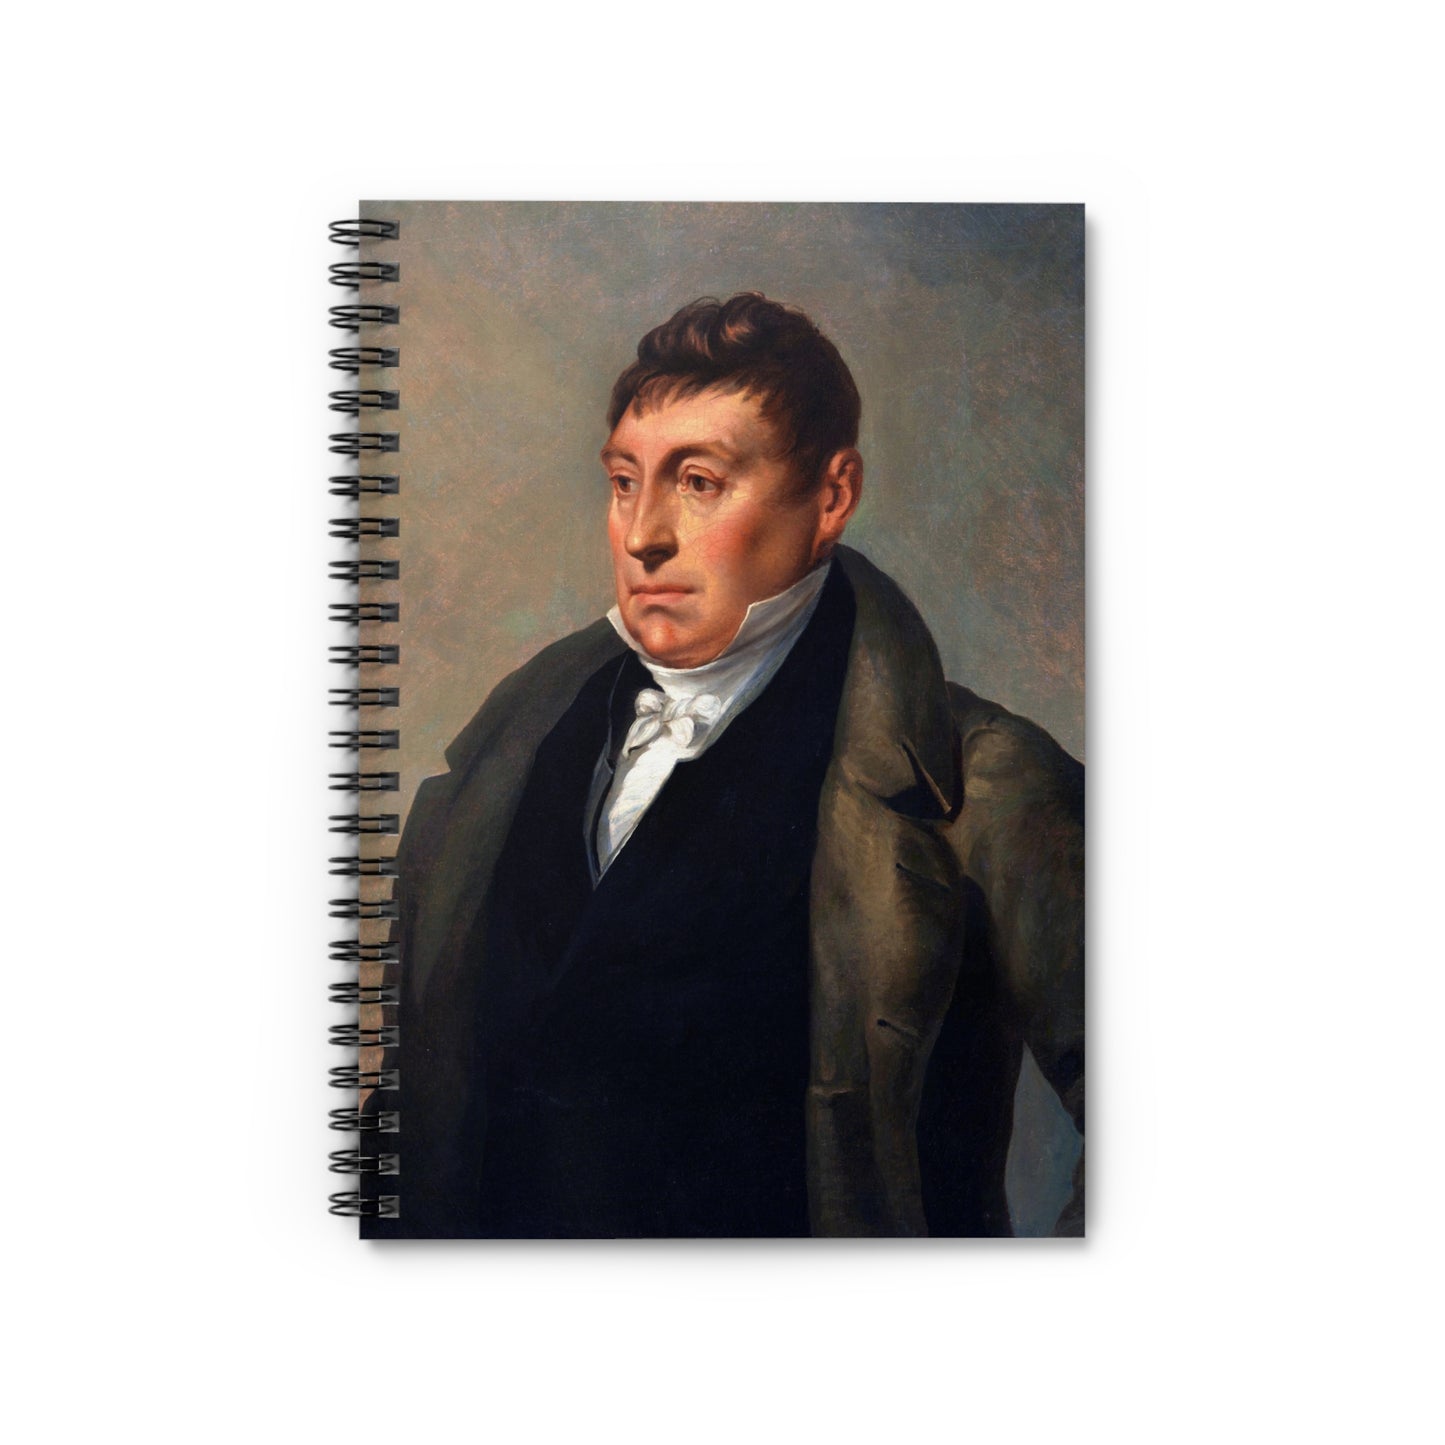 Lafayette 1820's Portrait Spiral Notebook - 6"x 8" lined-page notebook